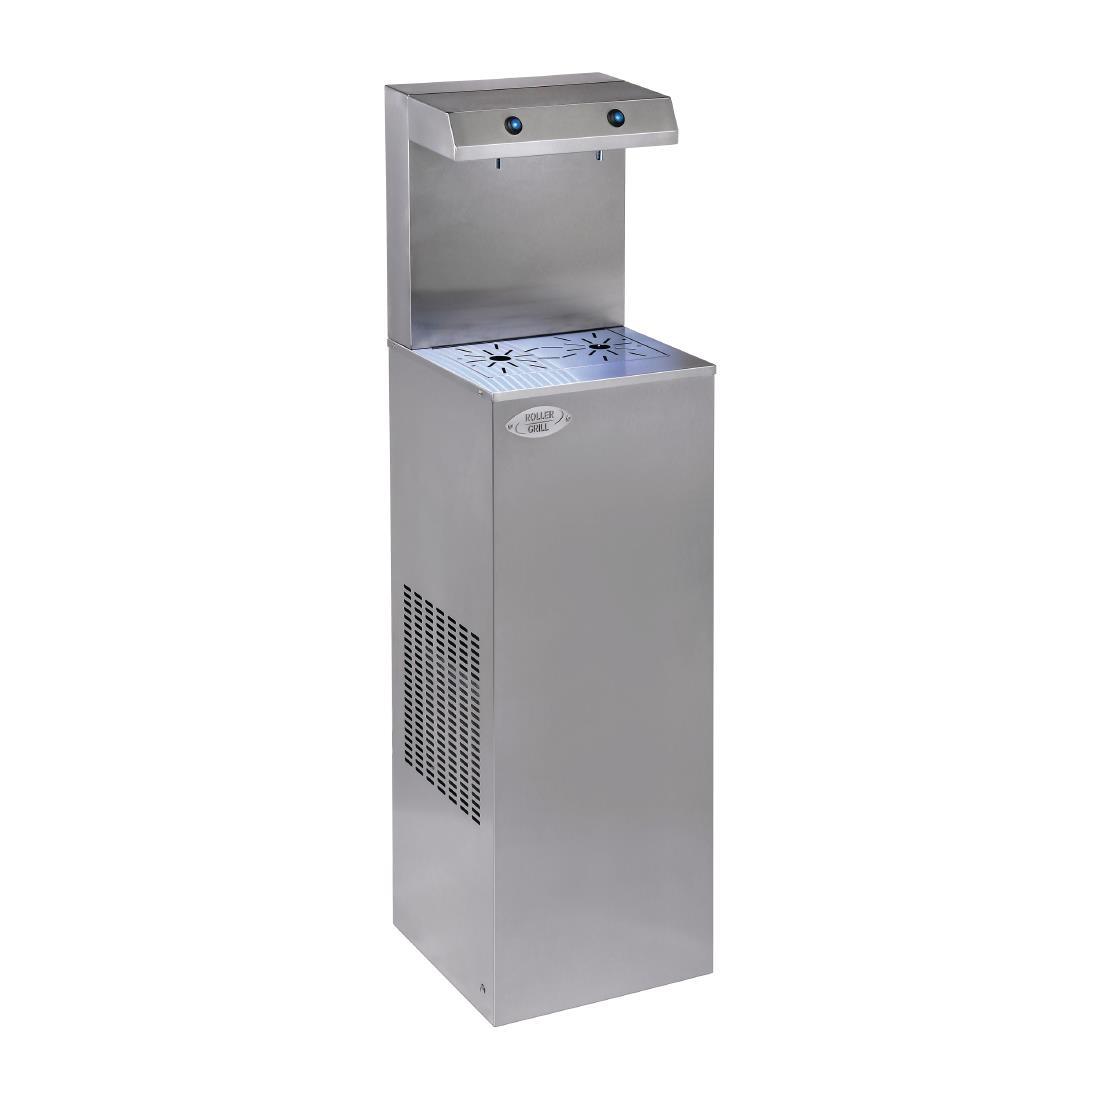 Roller Grill Drinking Fountain with Double Cup Filler AQUA80 - DE389  - 1